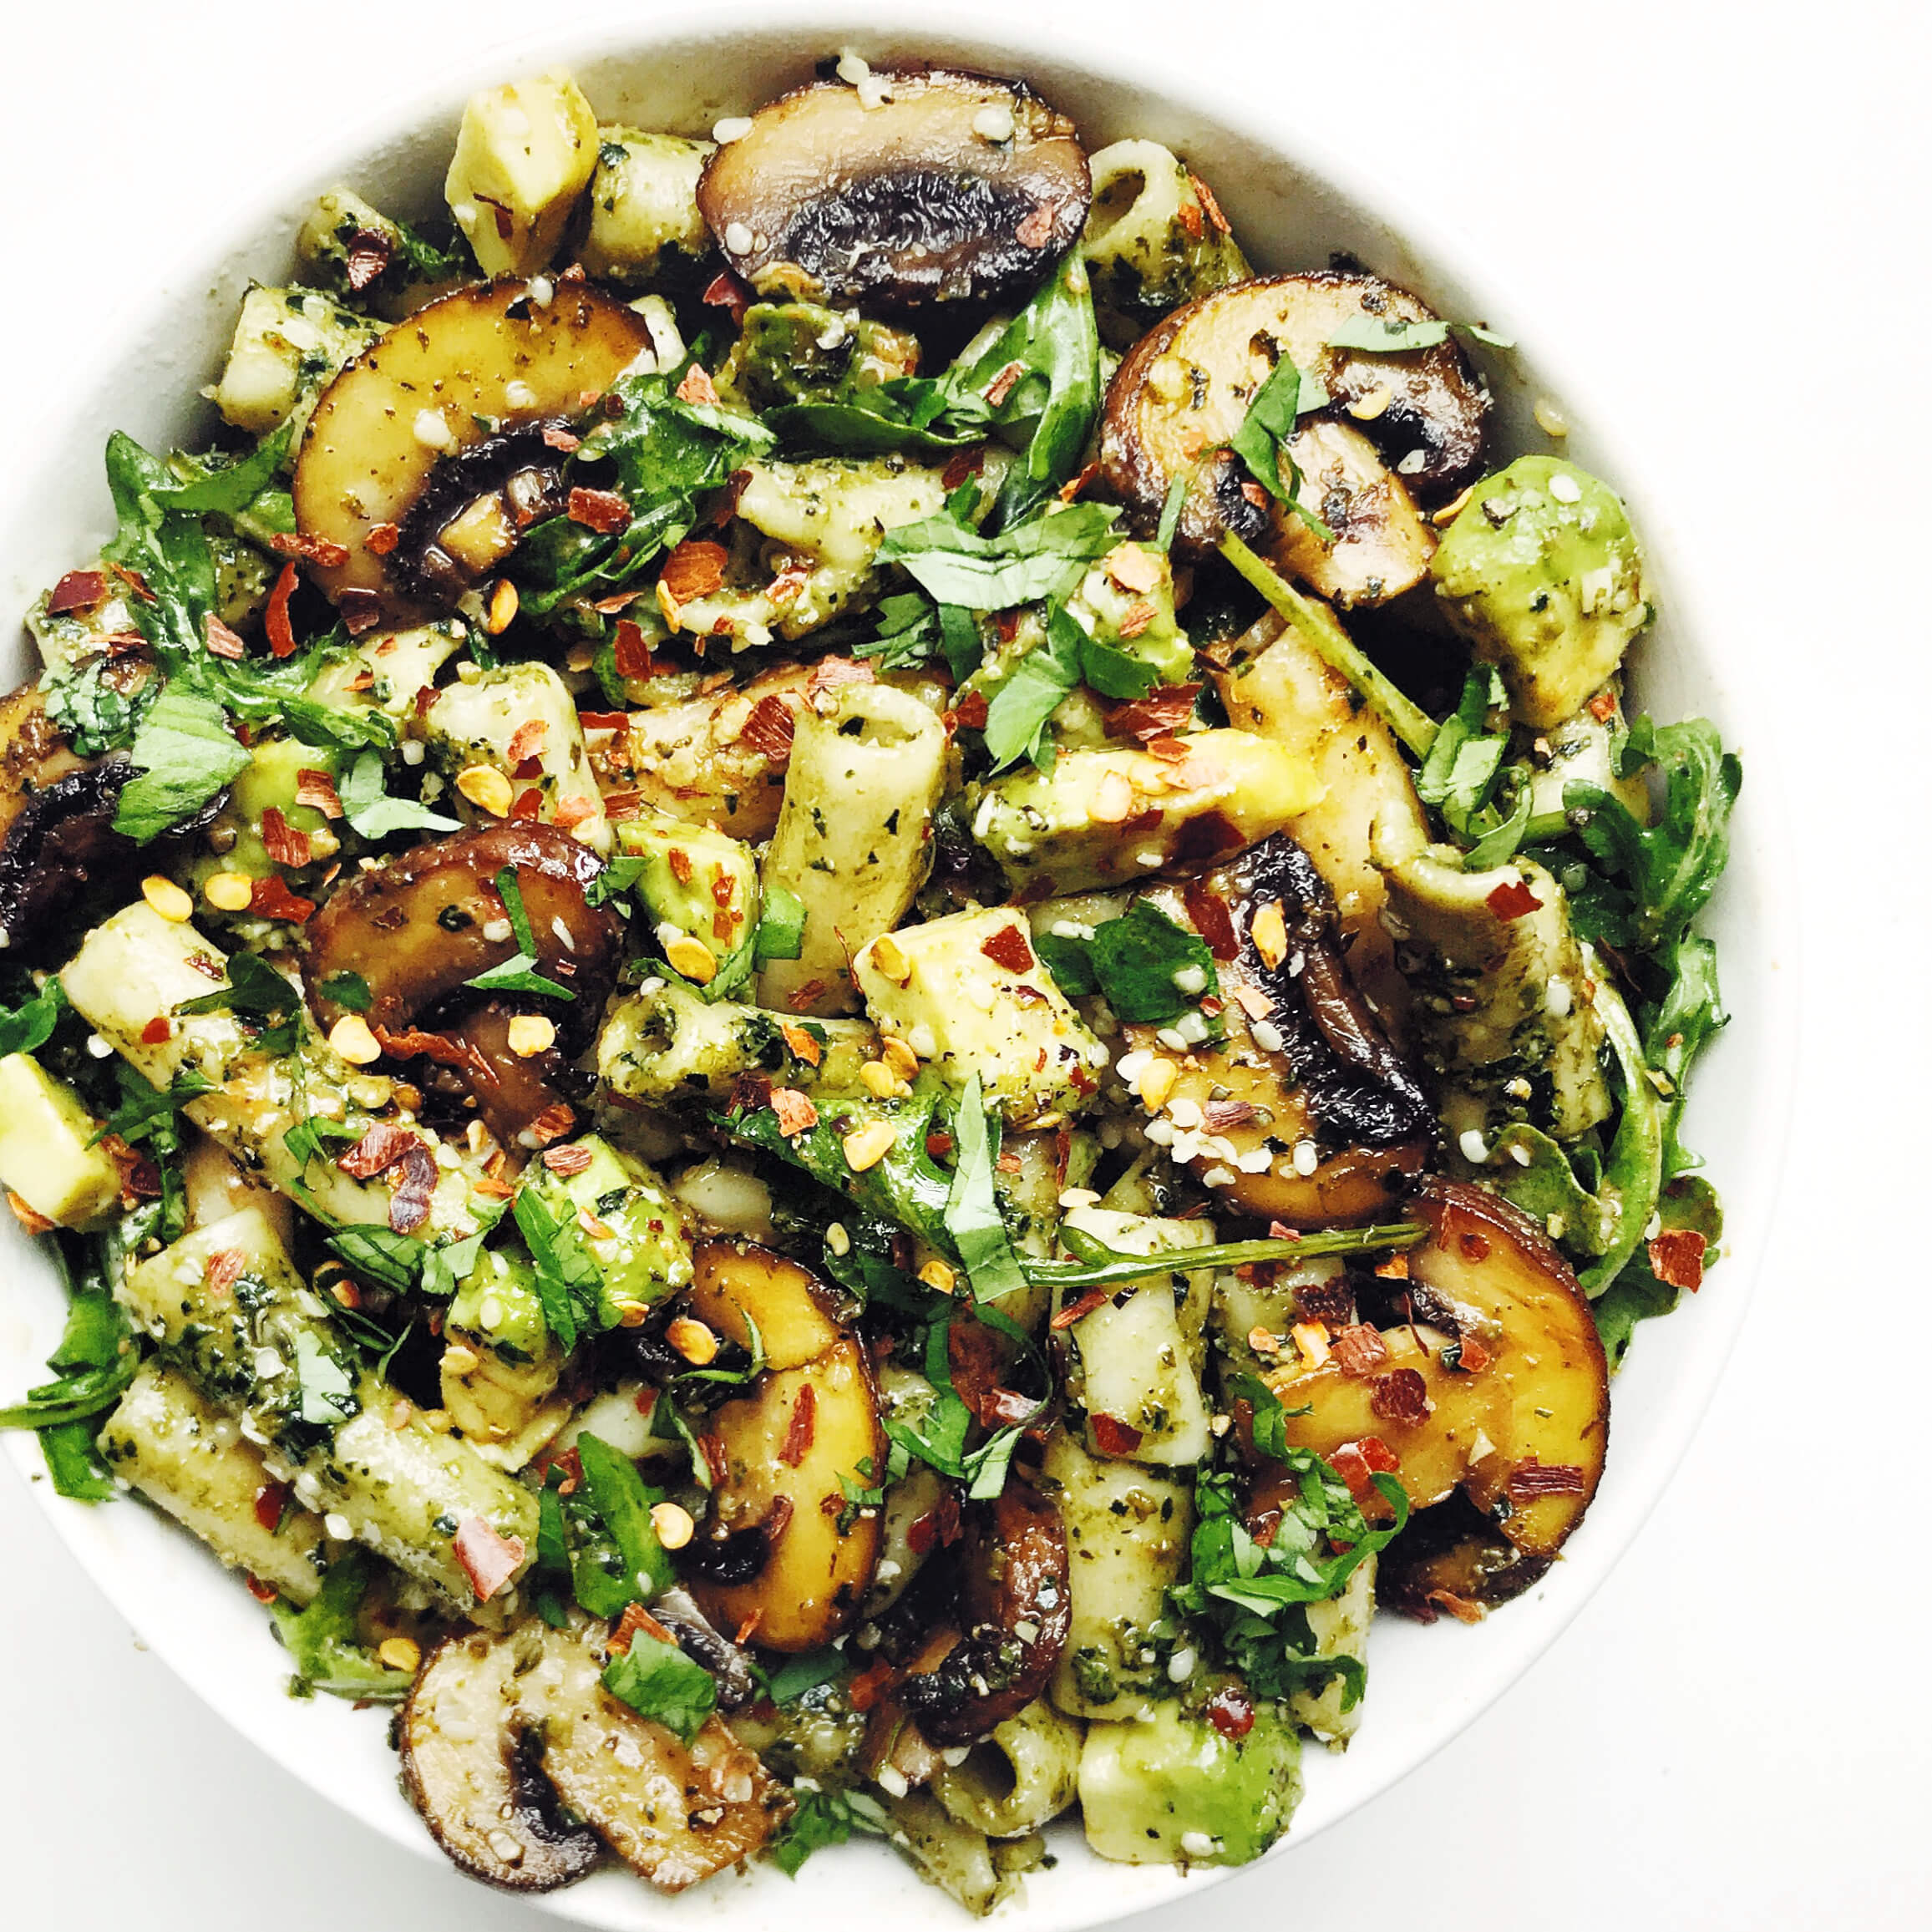 Avocado Chimichurri Pasta with Mushrooms | Feed Your Glow